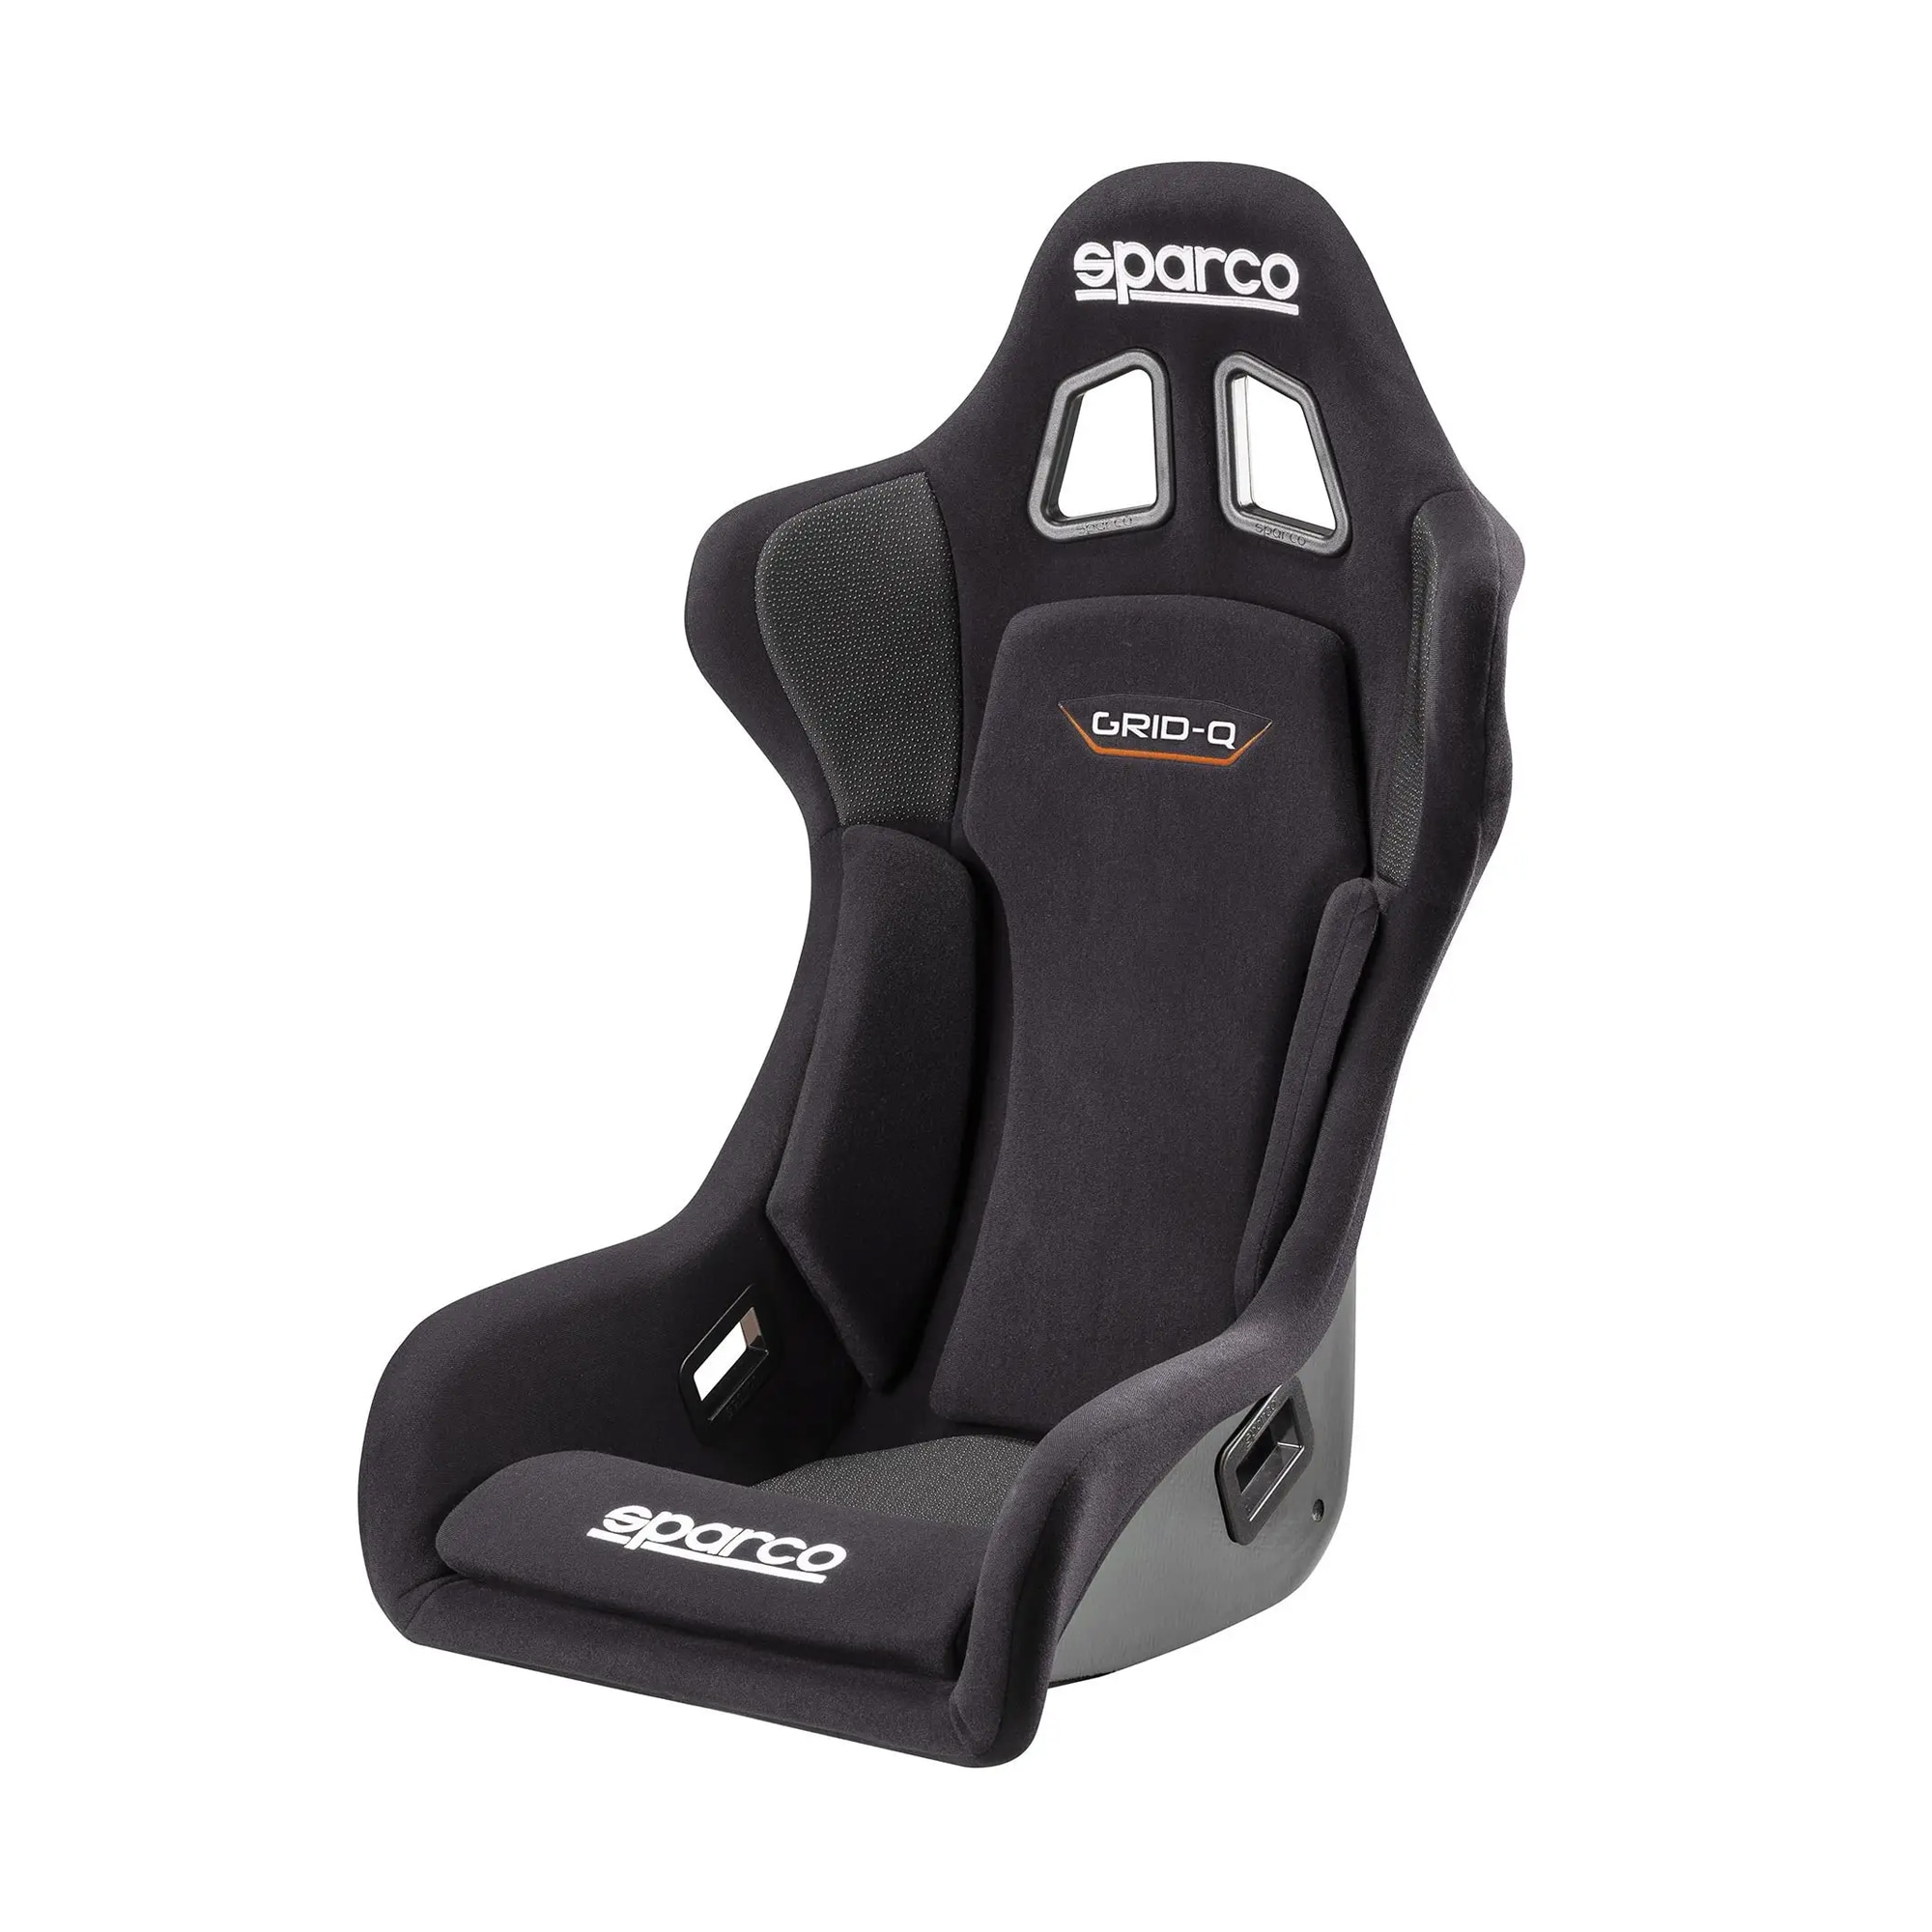 Stol Sparco Grid Q Gaming